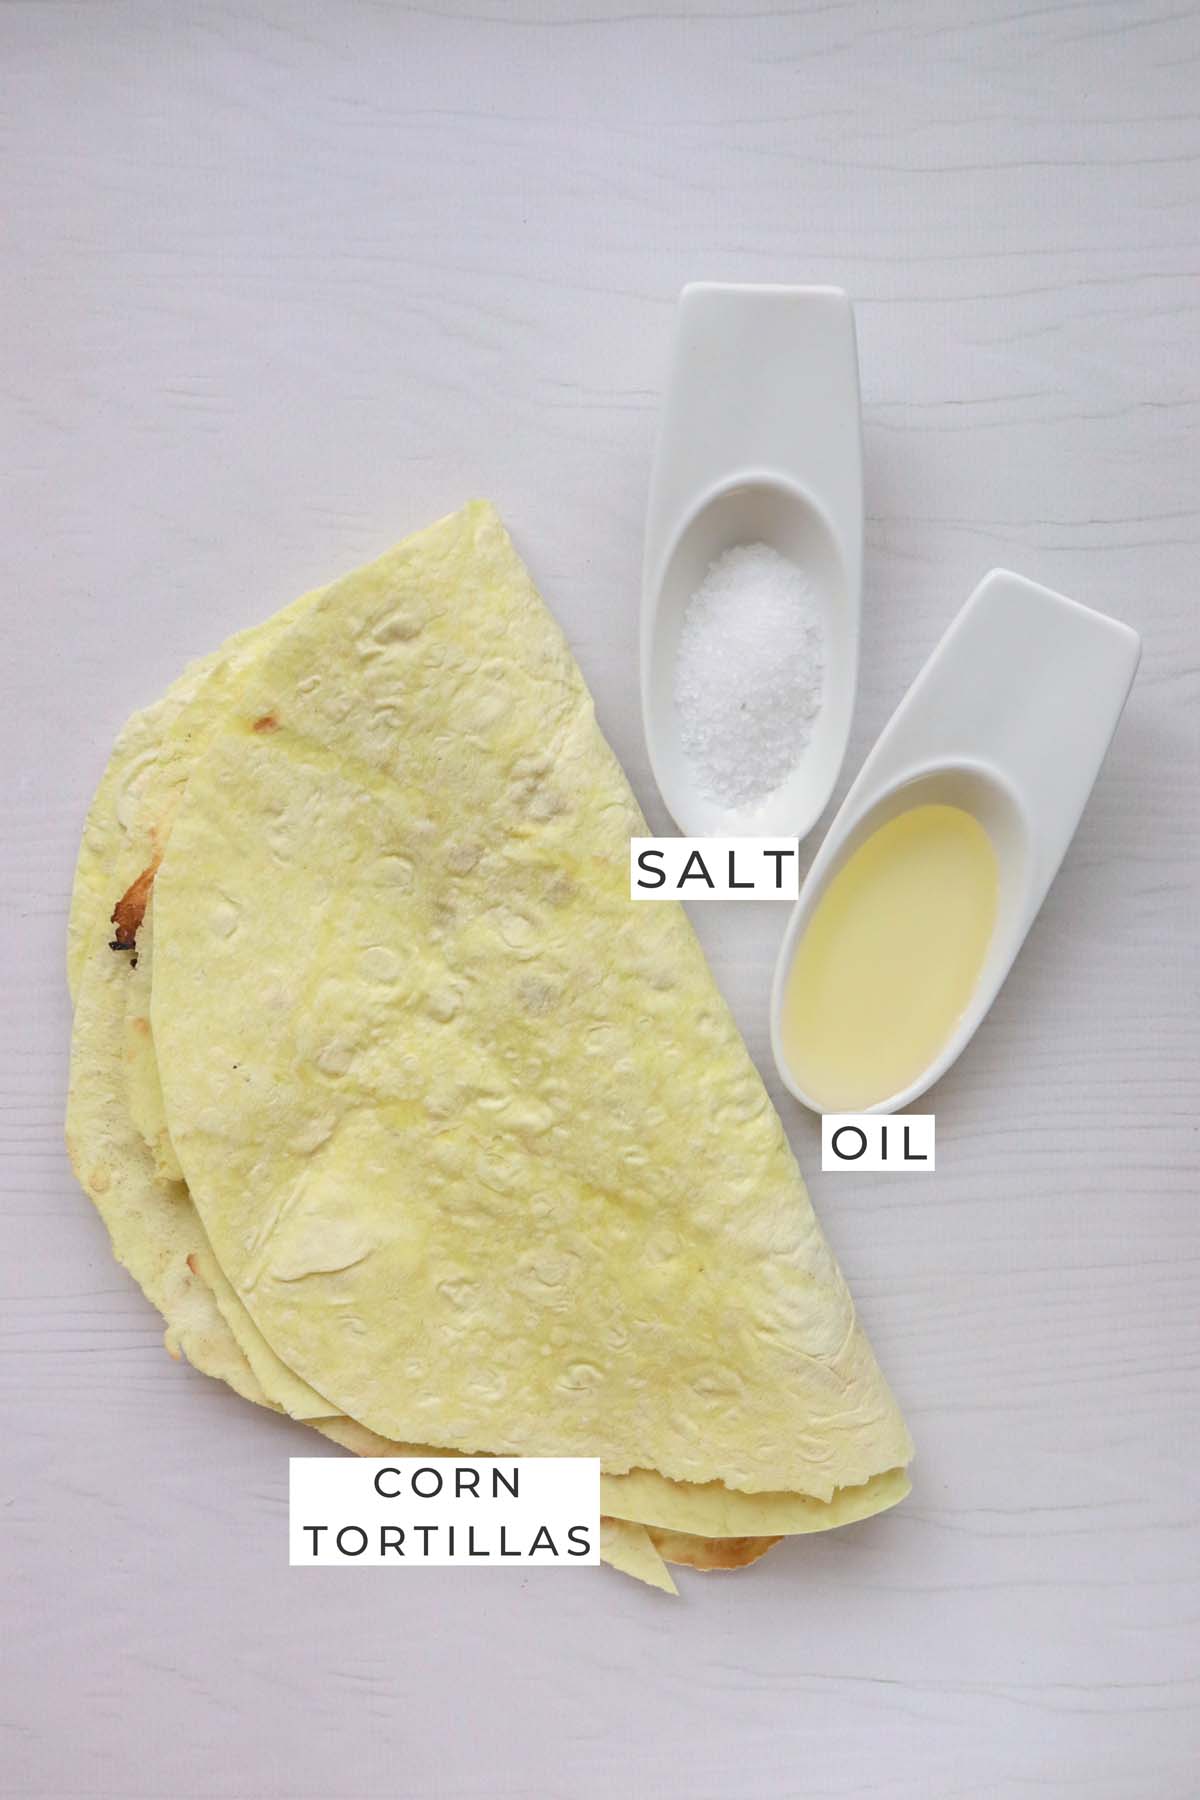 Labeled ingredients for the tortilla chips.